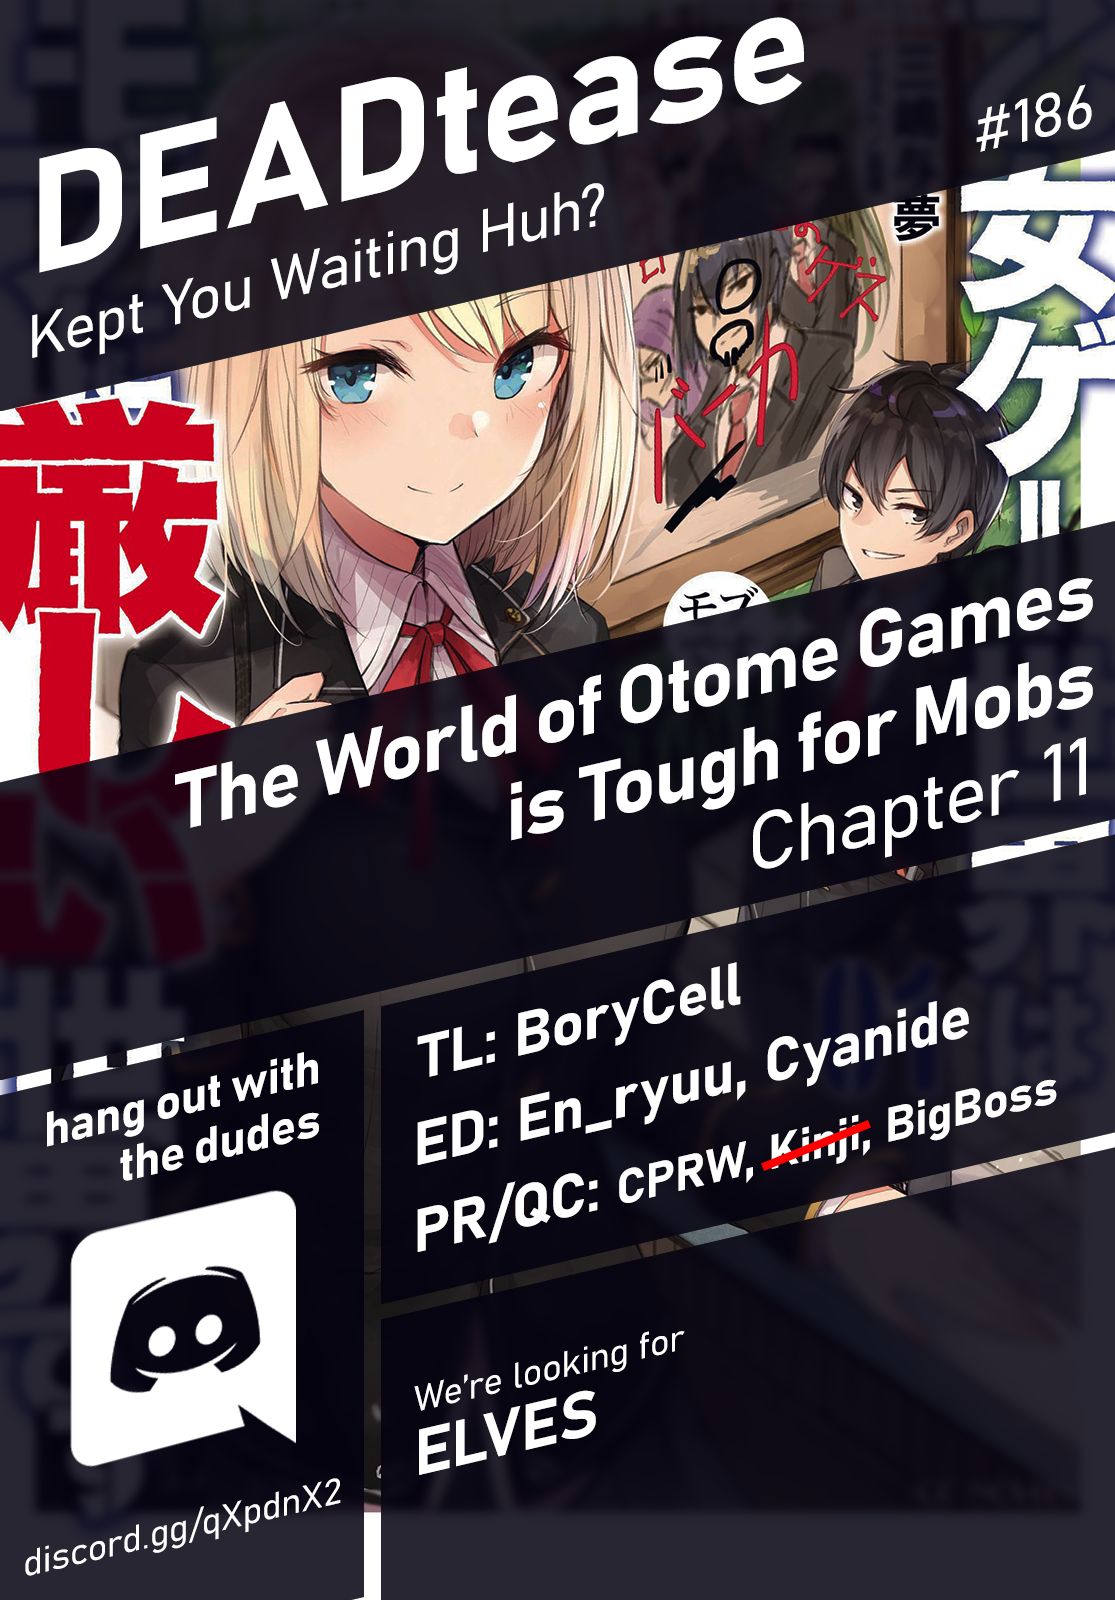 The World of Otome Games is Tough For Mobs - chapter 11 - #1